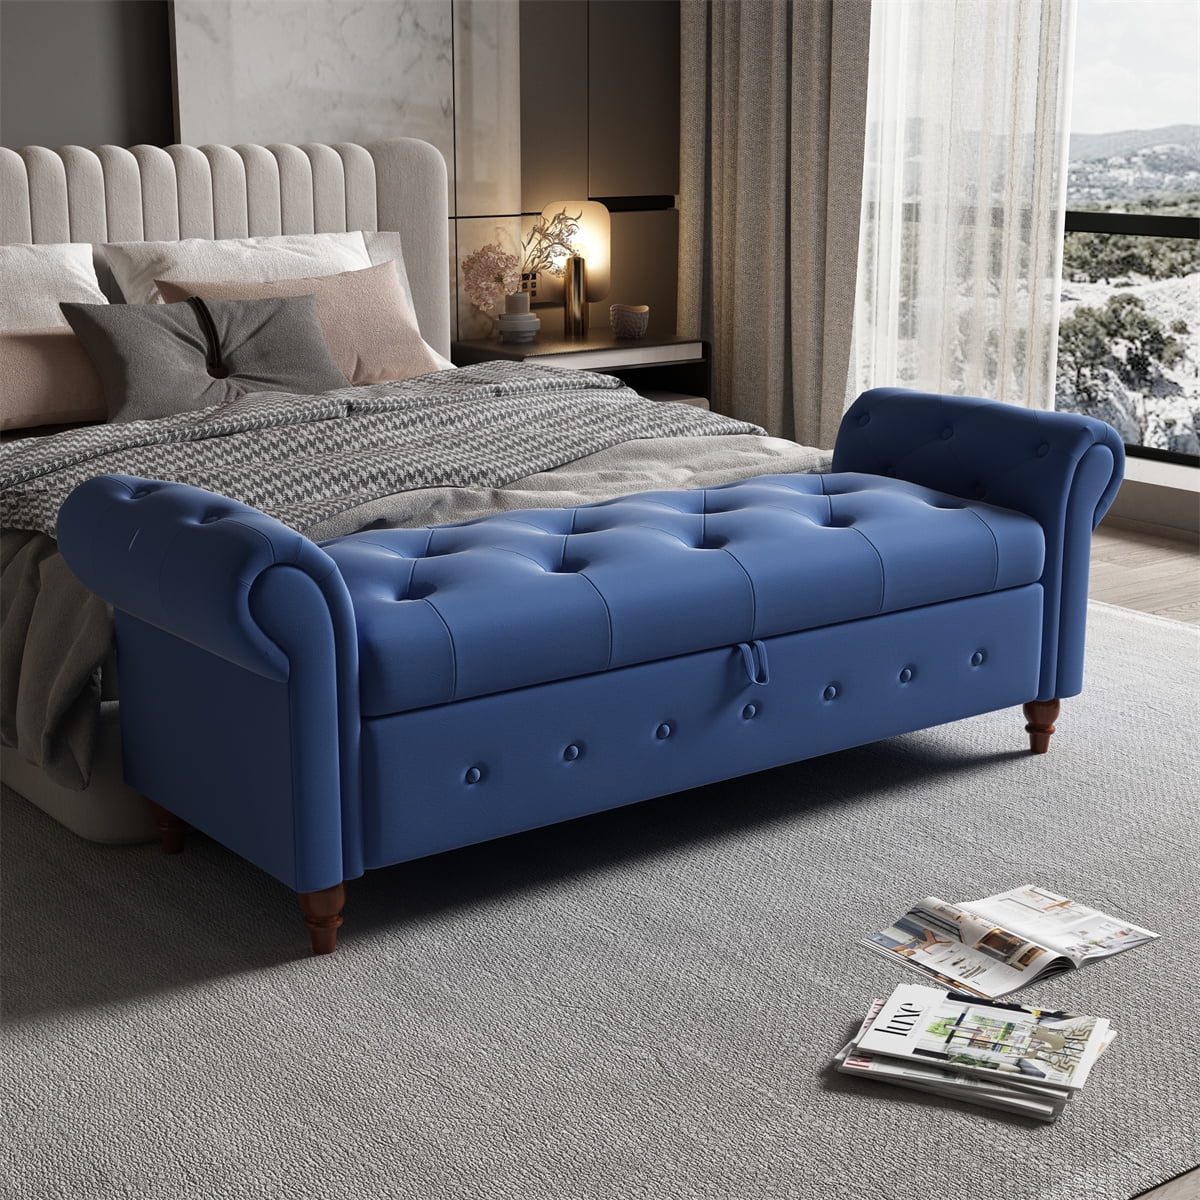 Tufted Storage Bench for Bedroom End of Bed, Polyester Upholstered Storage  Ottoman Bench for Bedroom Living Room, Rolled Arm Window Bench Seat with